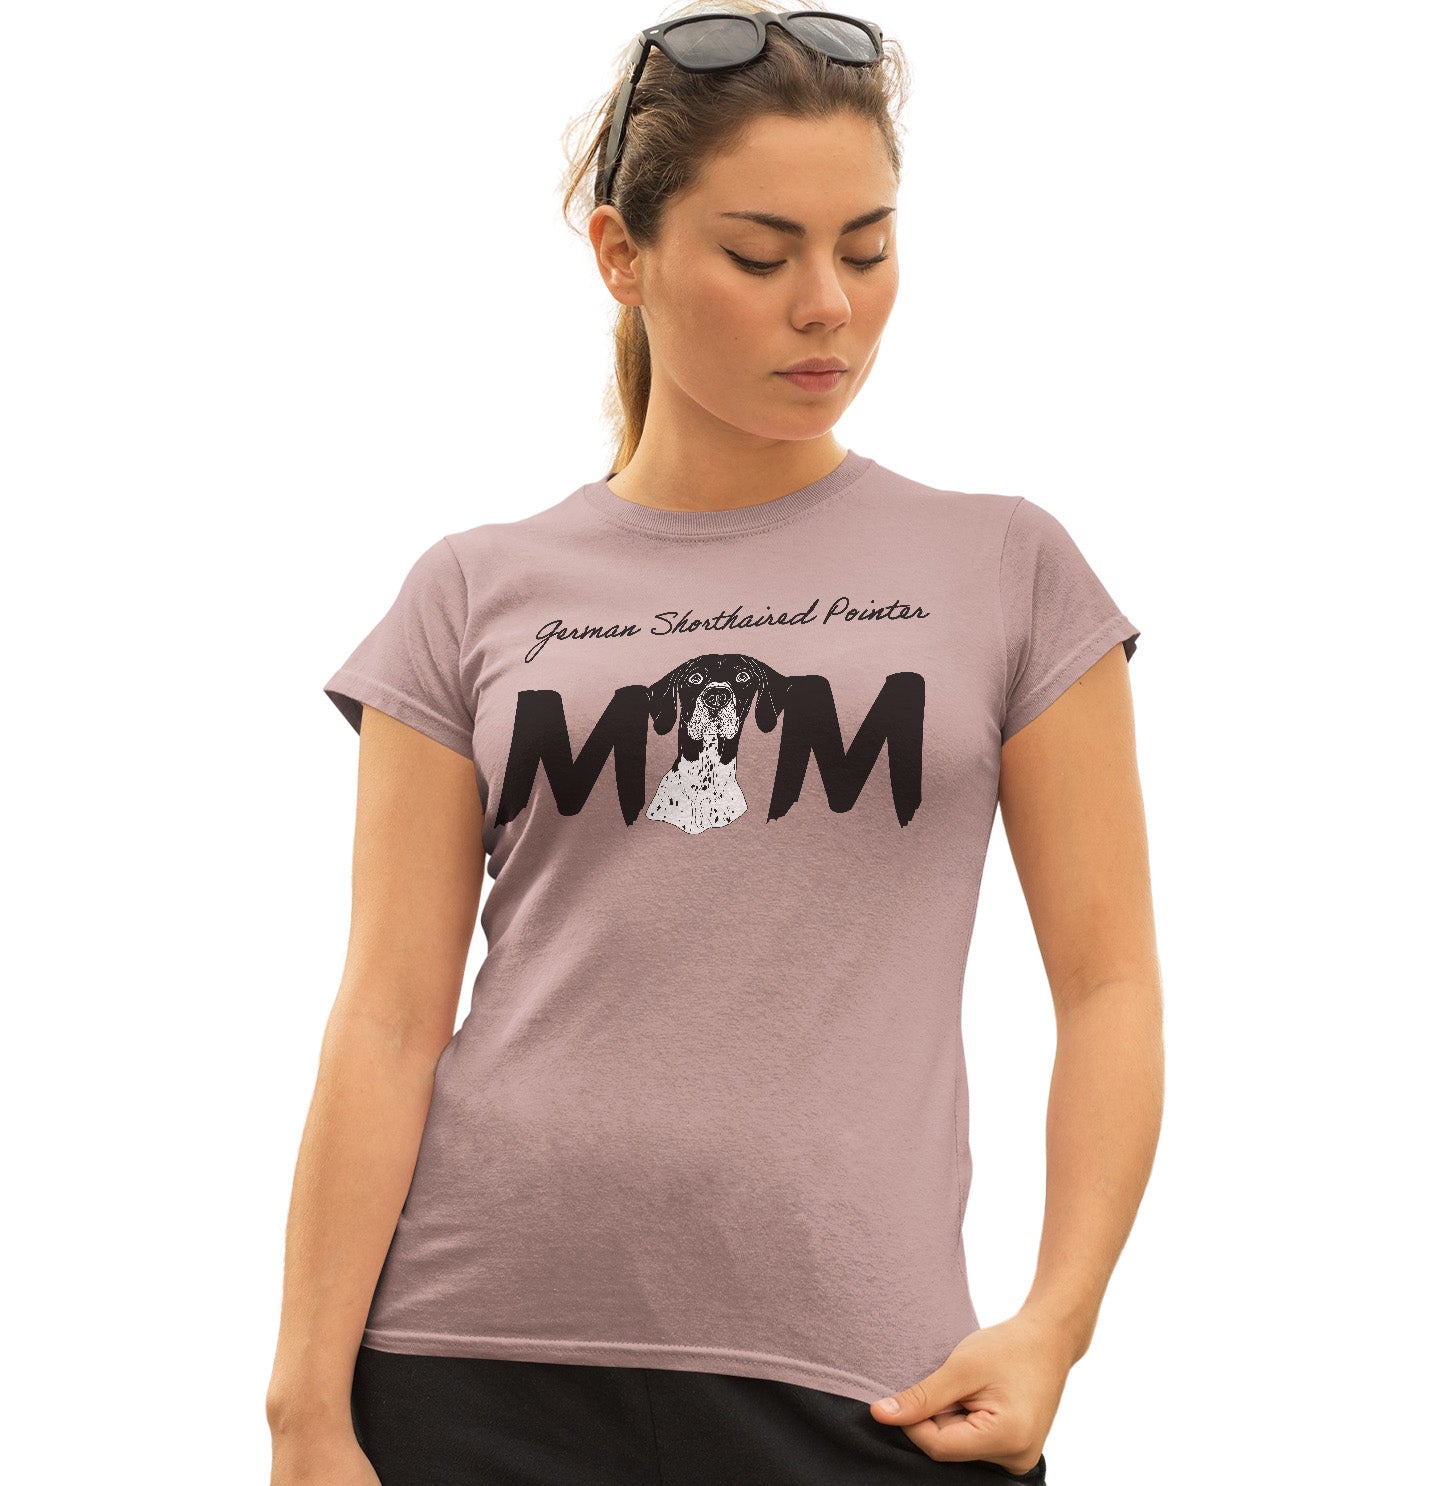 German Shorthaired Pointer Breed Mom - Women's Fitted T-Shirt